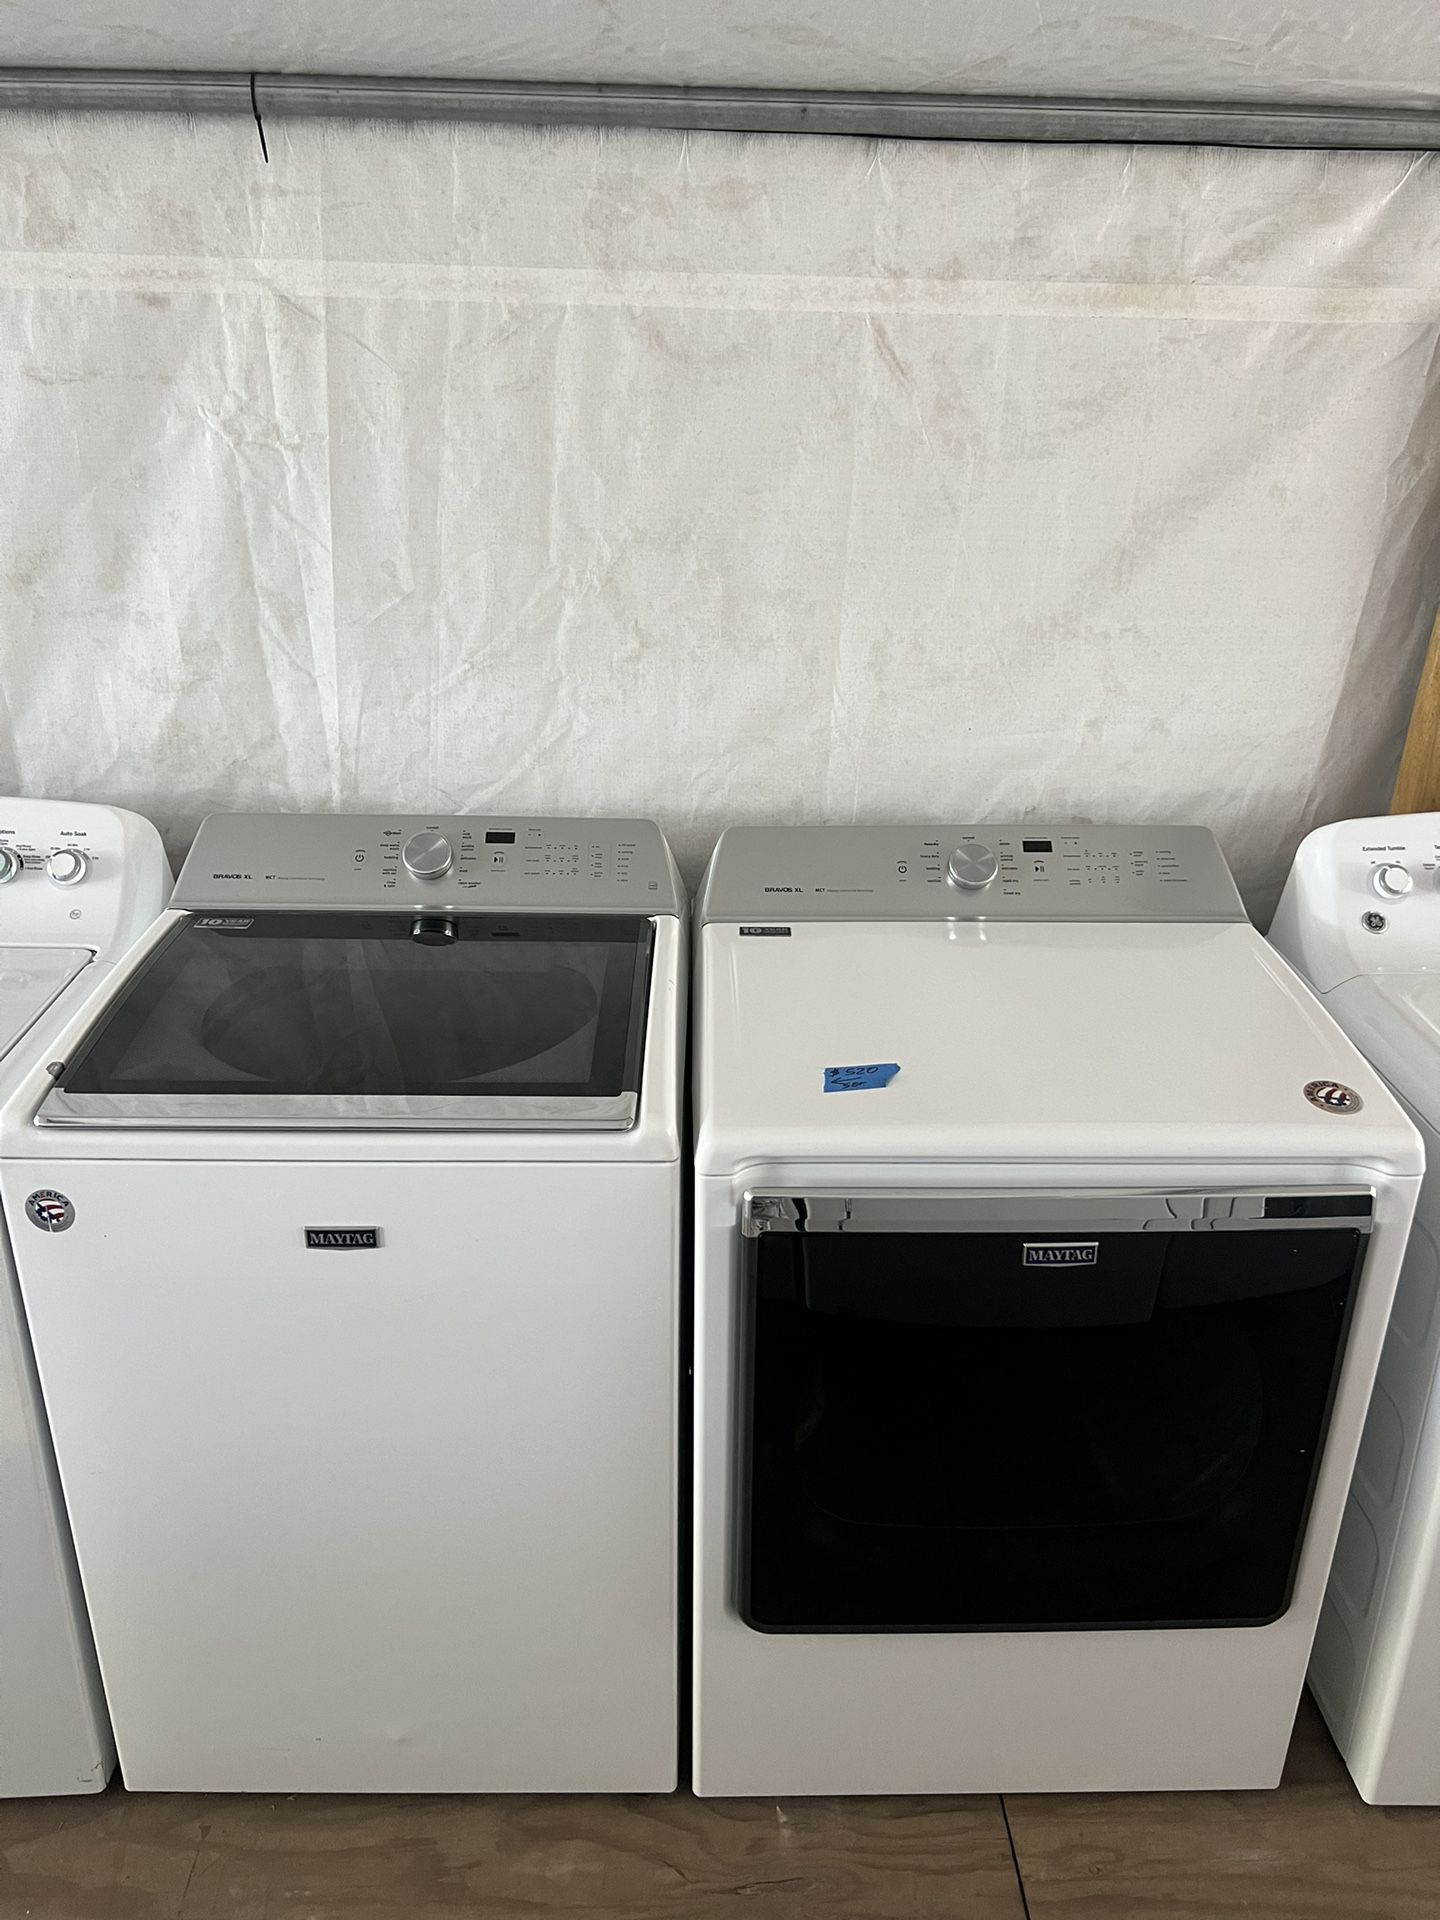 Maytag Washer&dryer Large Capacity Set   60 day warranty/ Located at:📍5415 Carmack Rd Tampa Fl 33610📍